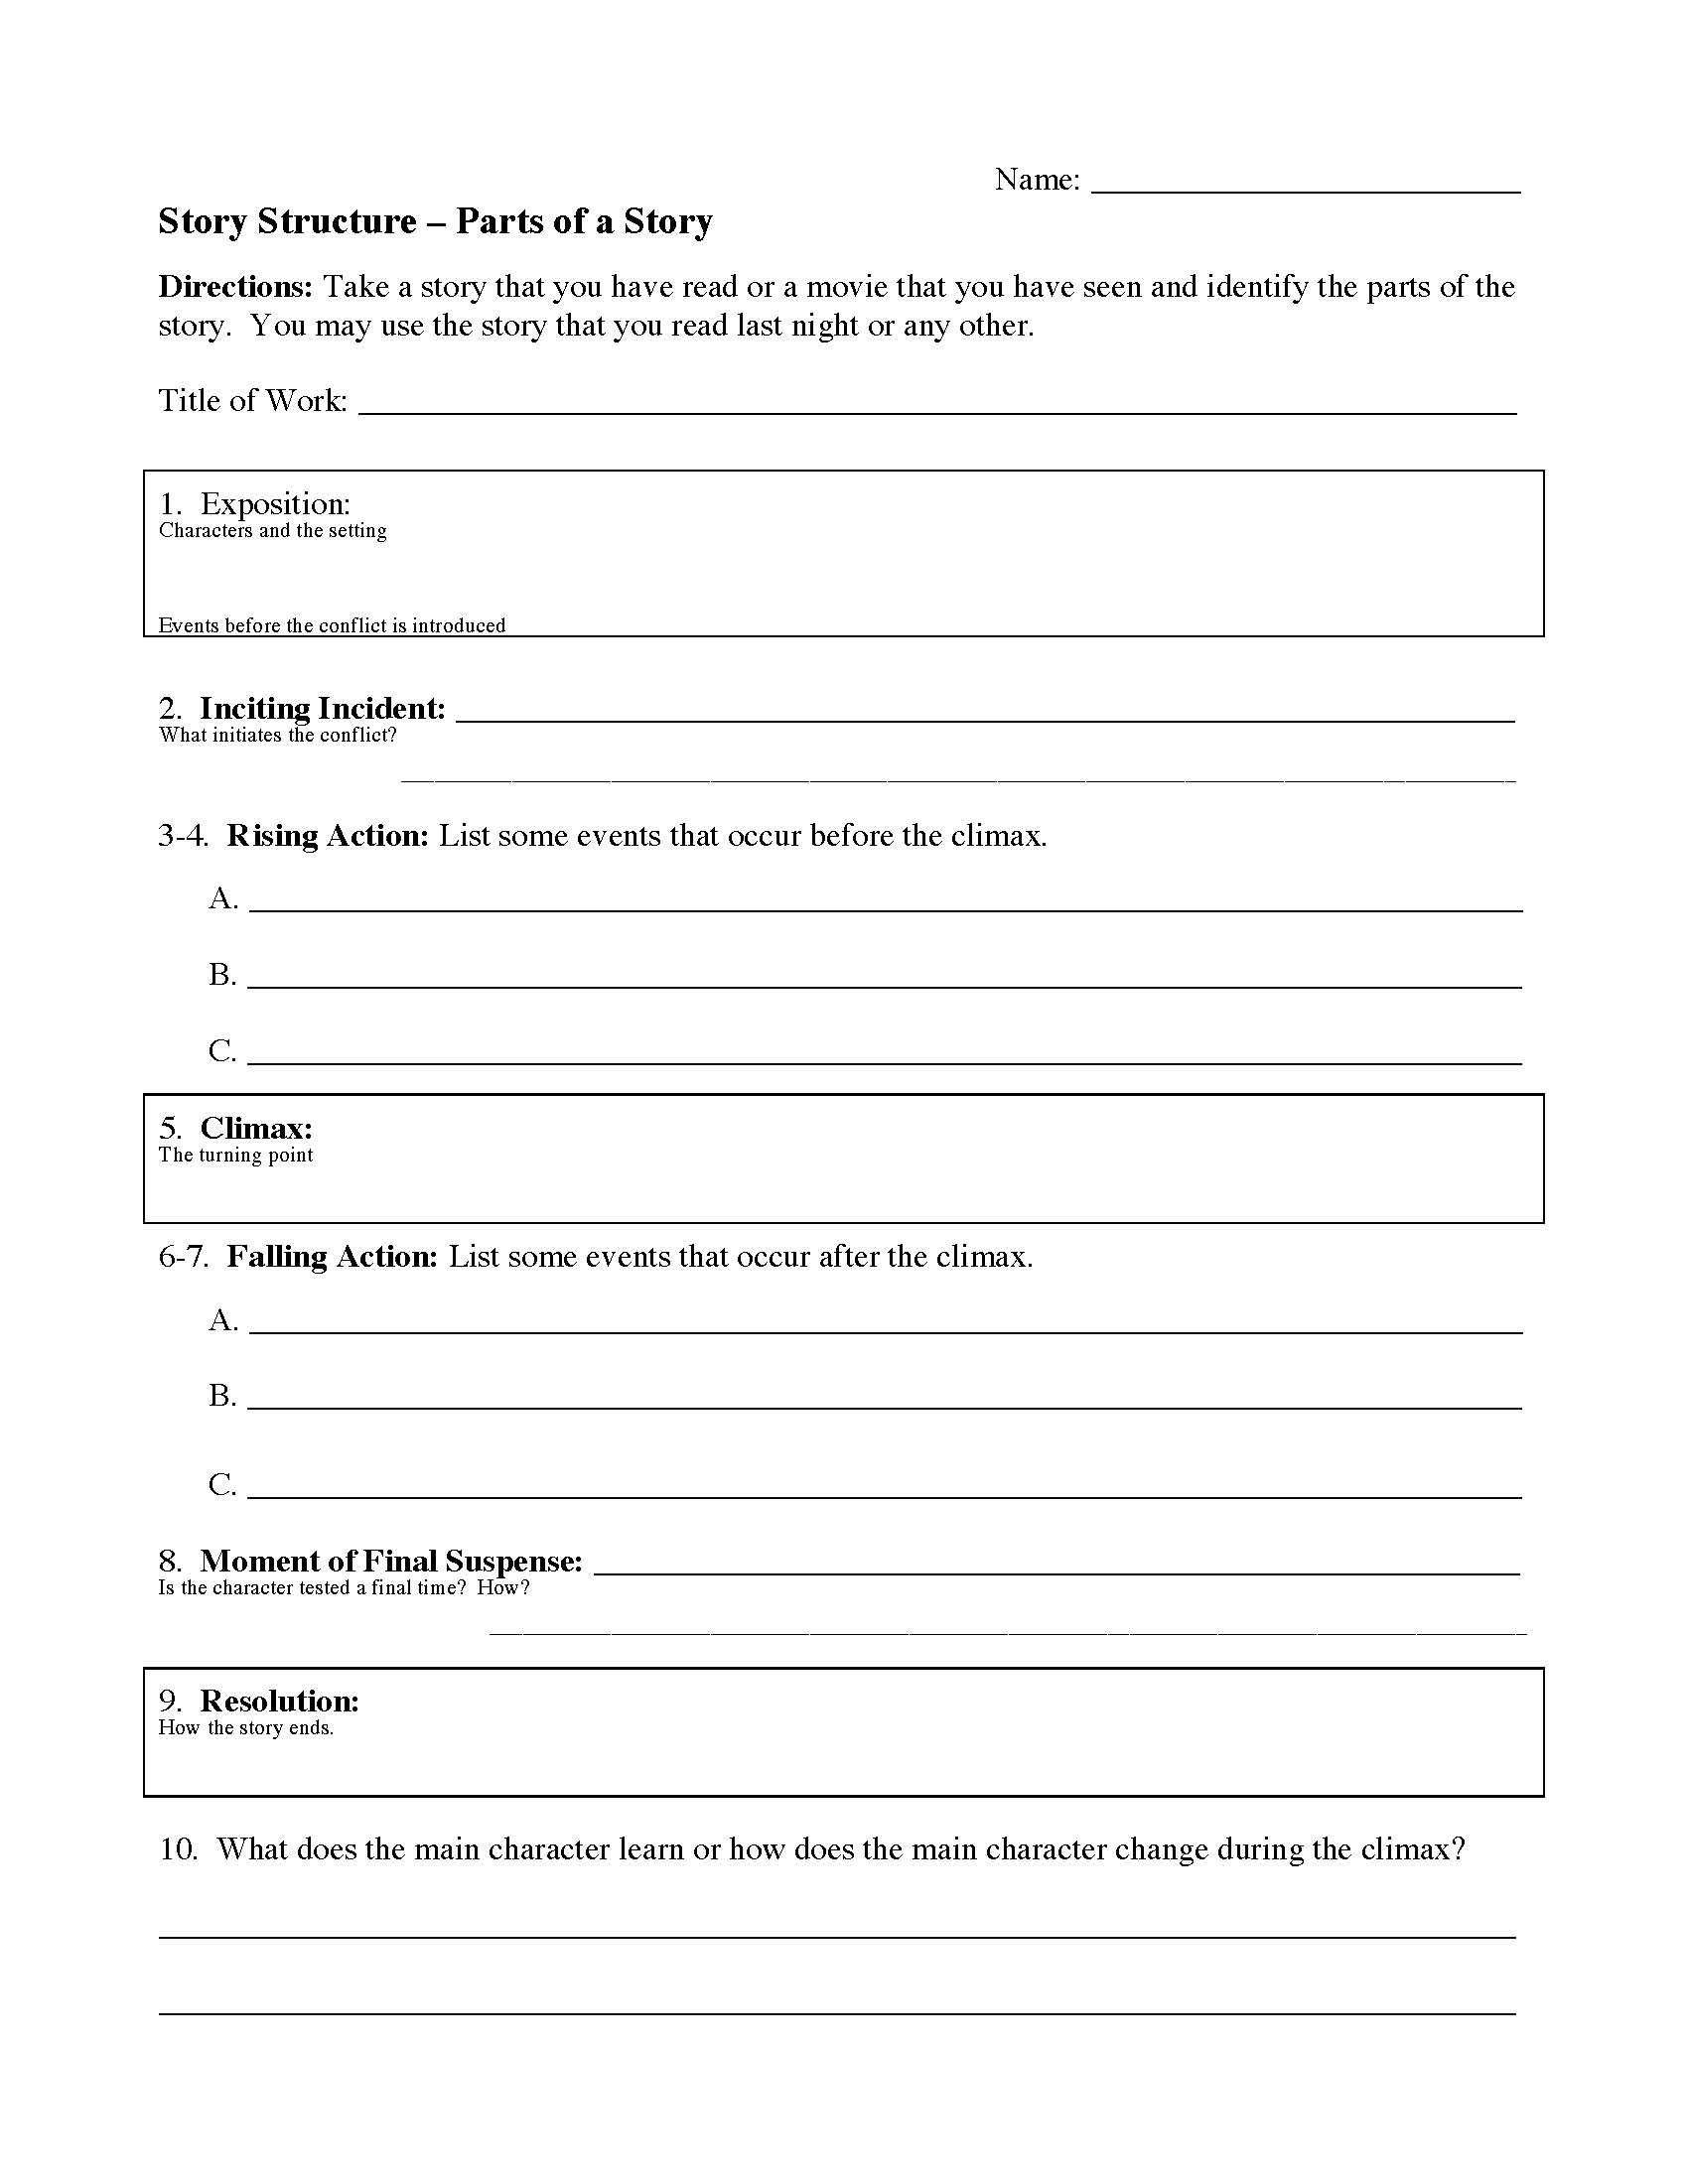 This is a preview image of Story Structure Worksheet Template. Click on it to enlarge it or view the source file.